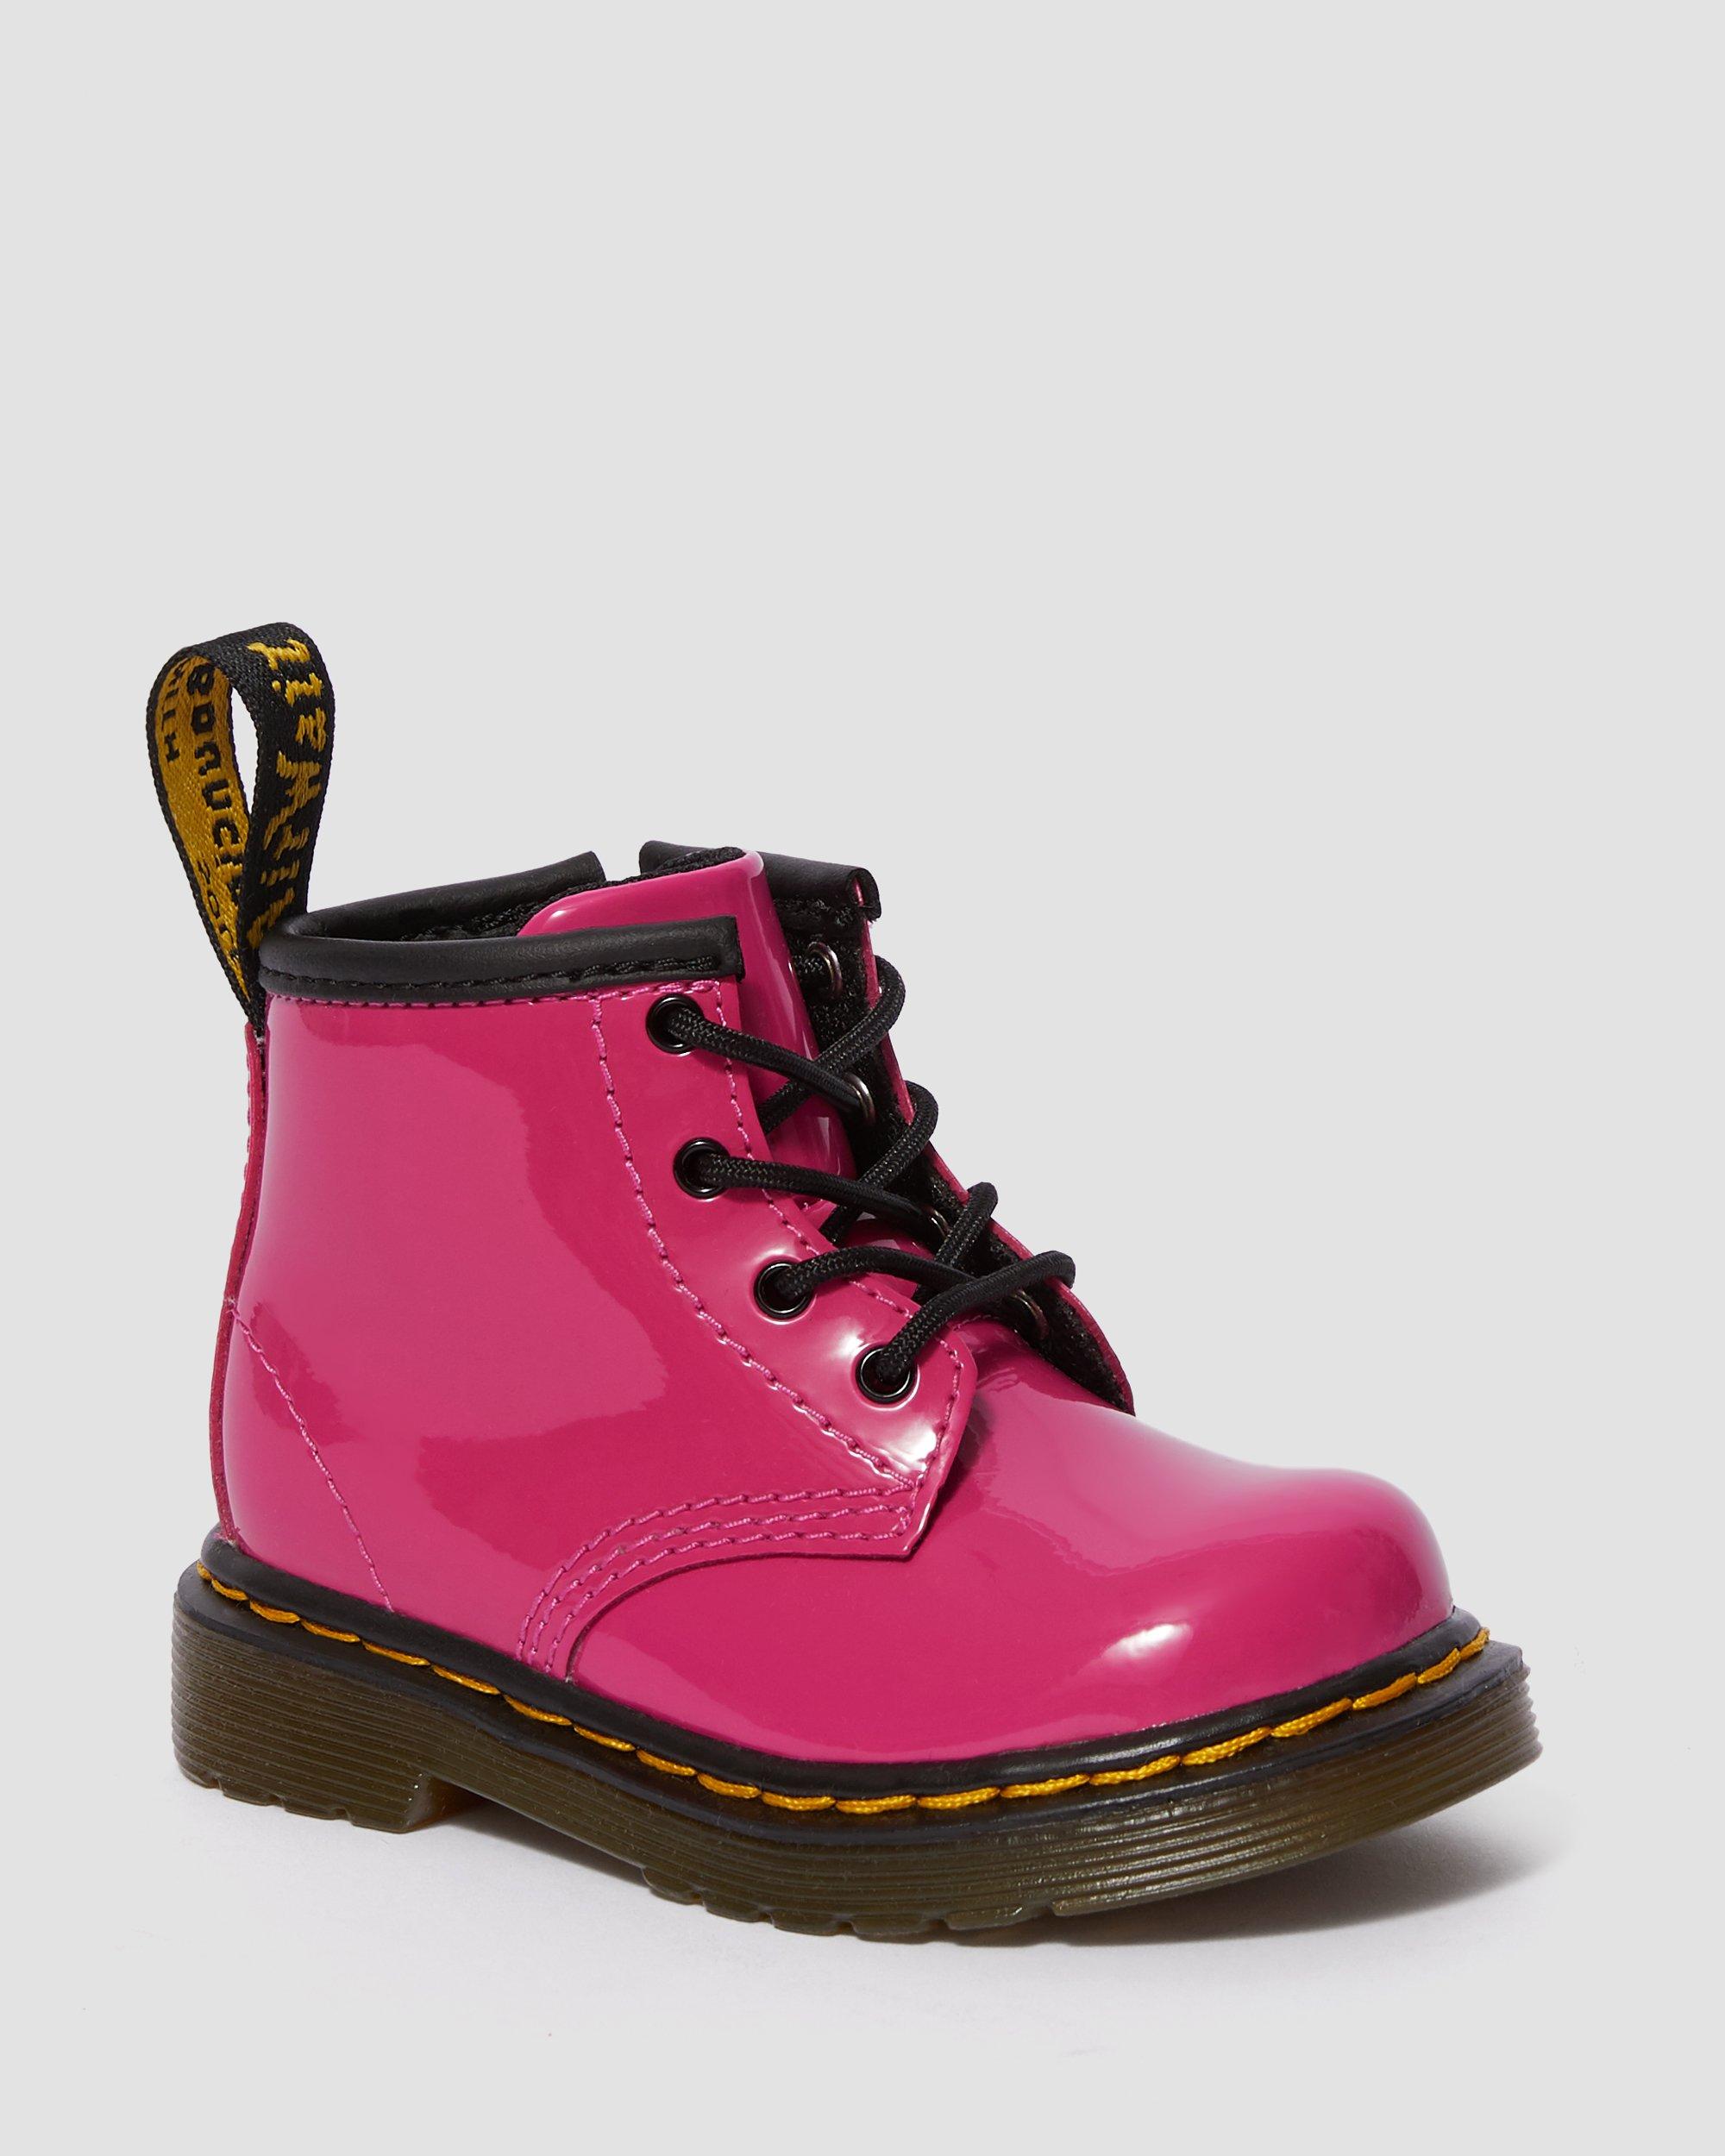 Infant 1460 Patent Leather Lace Up Boots in Hot Pink